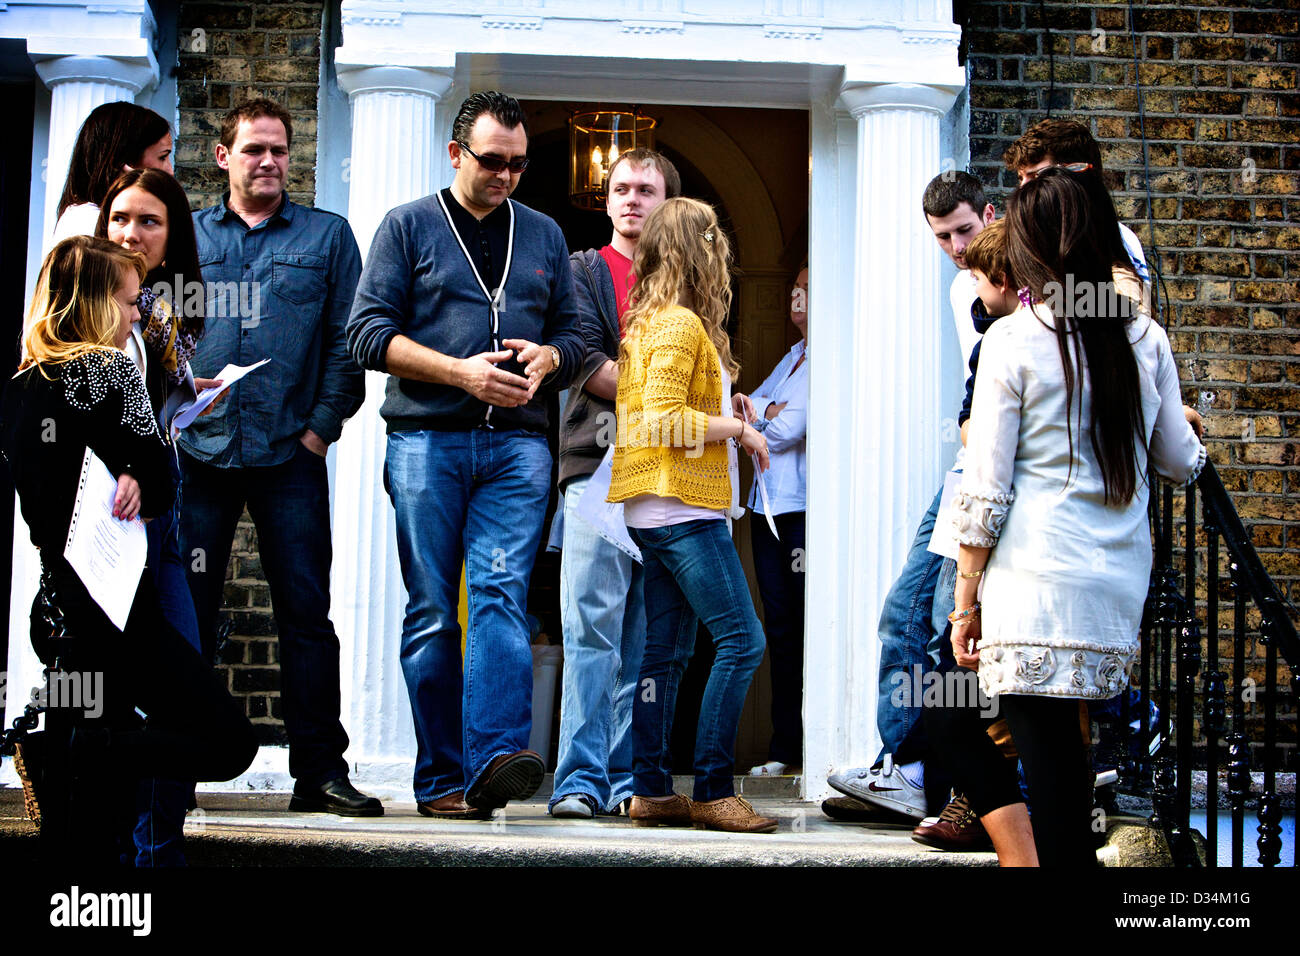 young people hanging around a doorway Stock Photo